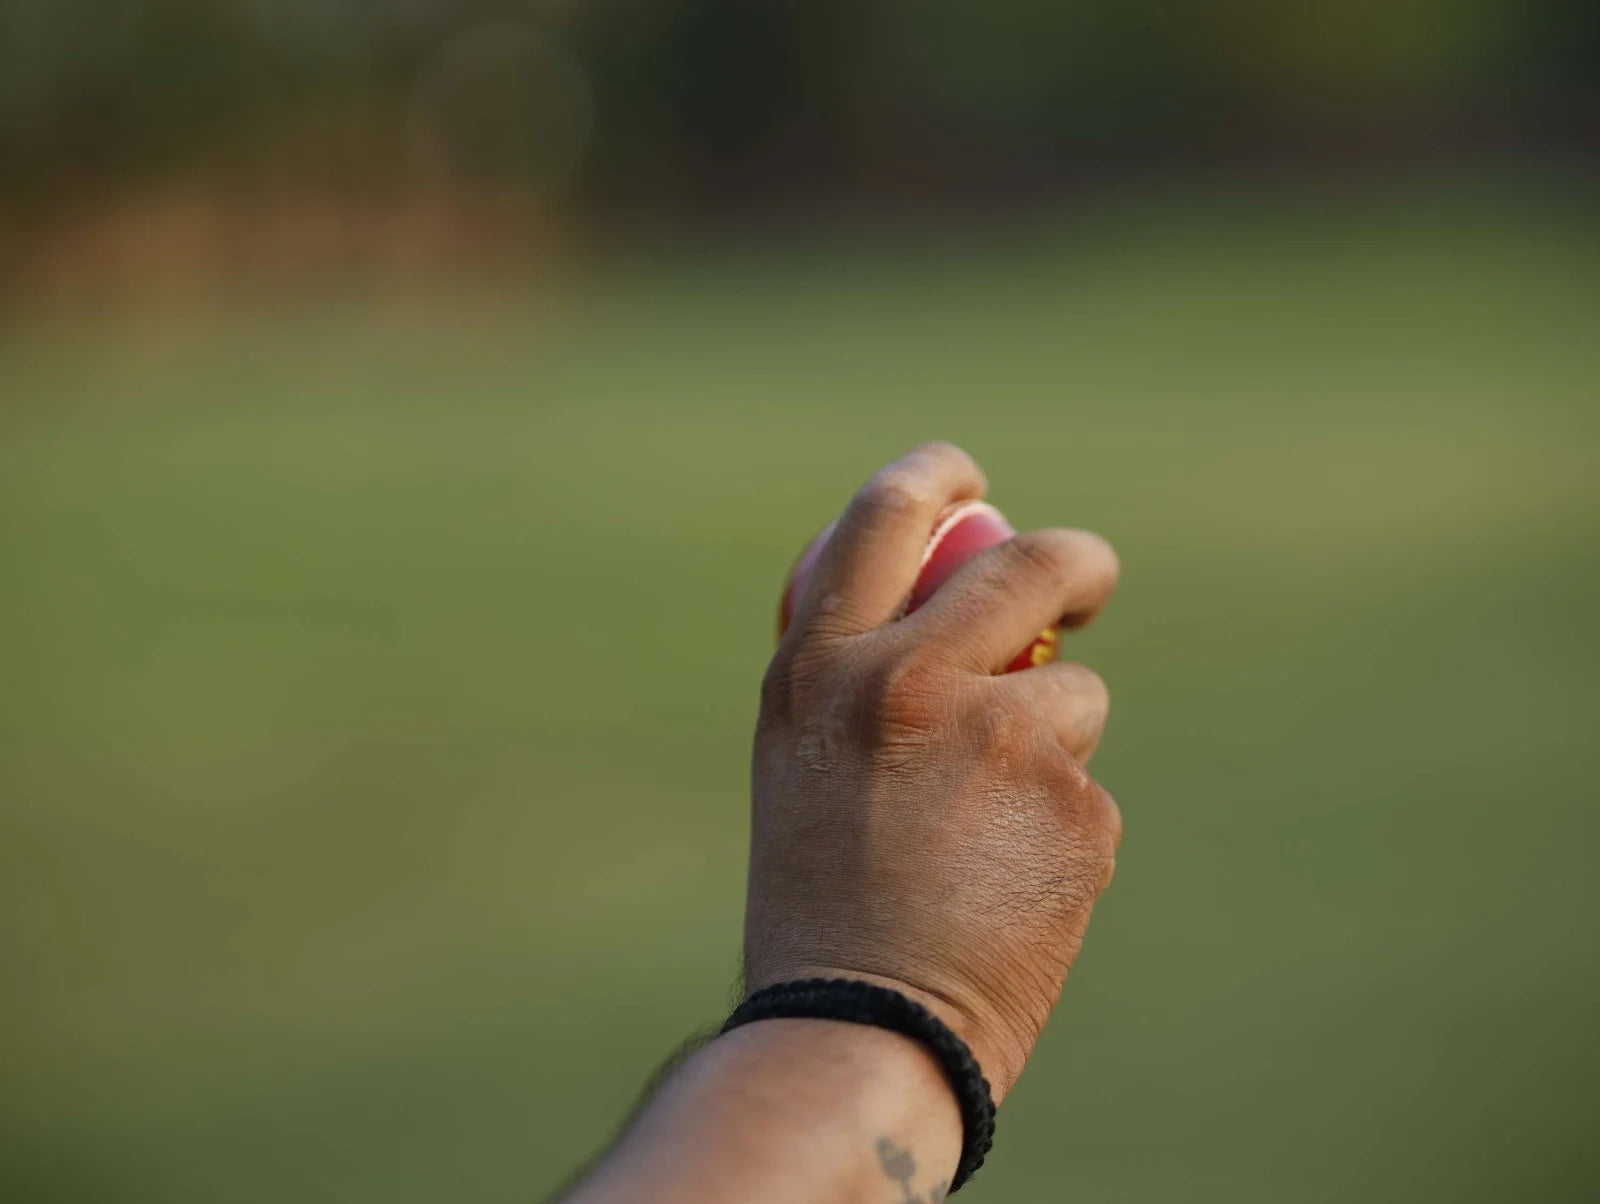 The Reverse Swing bowling Grip